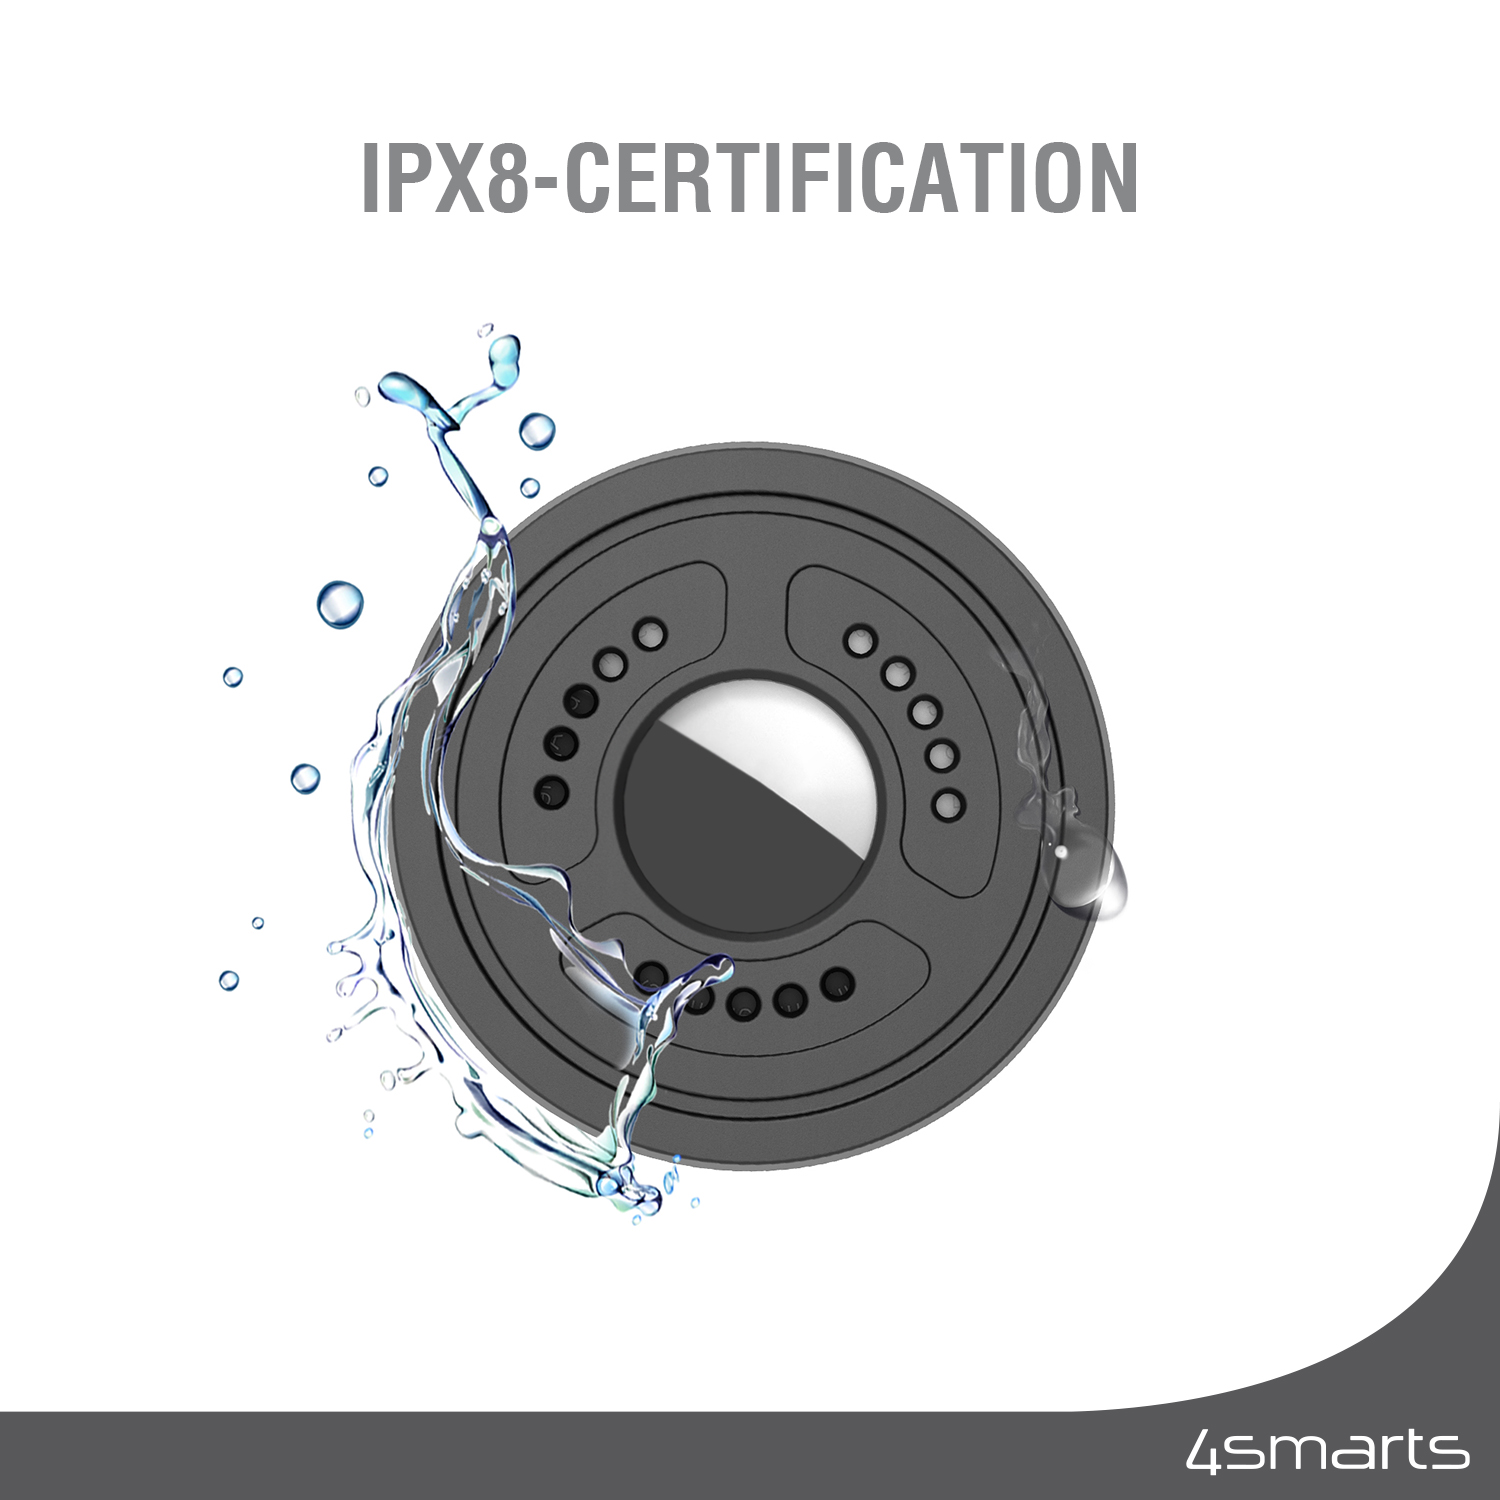 Your AirTag is protected in extreme weather conditions or water contact because of the IPX8 waterproof rating.